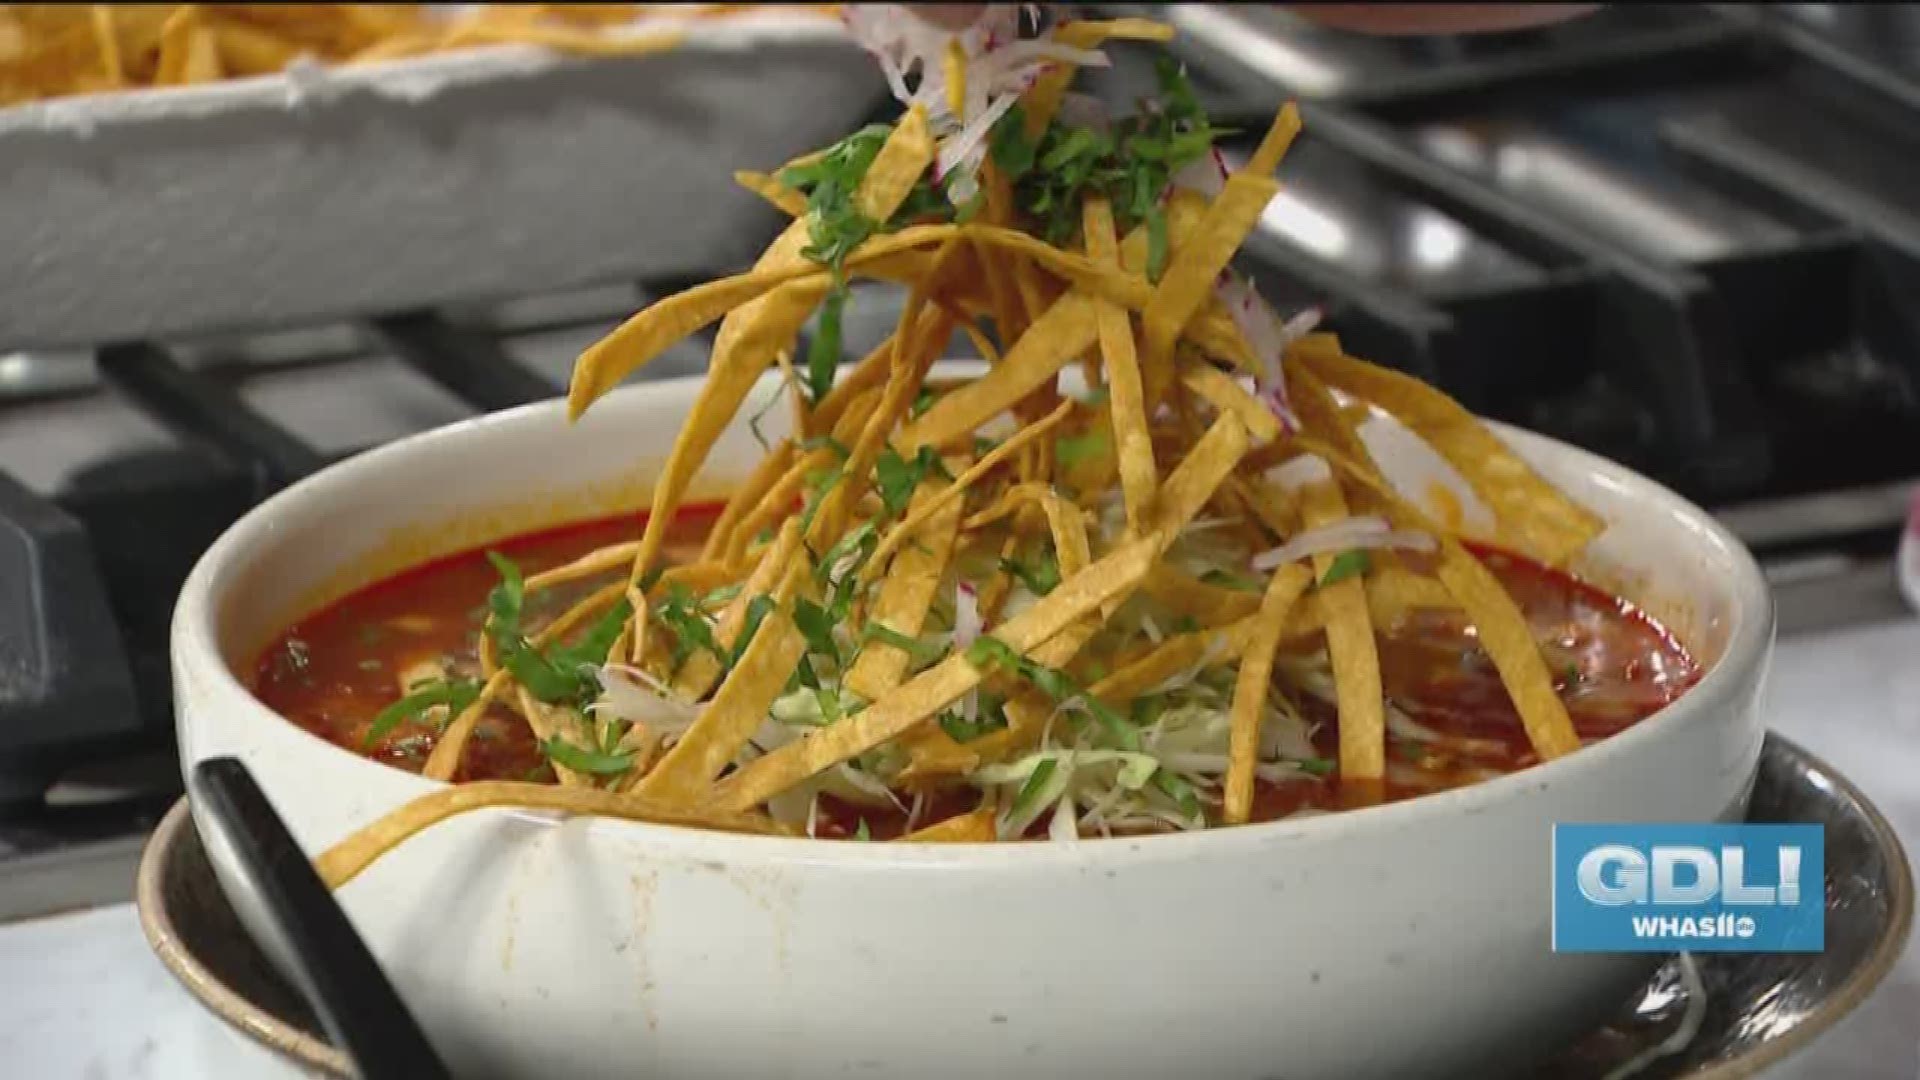 Fernando and Yano Martinez from El Taco Luchador stopped by Great Day Live to talk about this soup, which is made with chicken broth, spices and hominy.